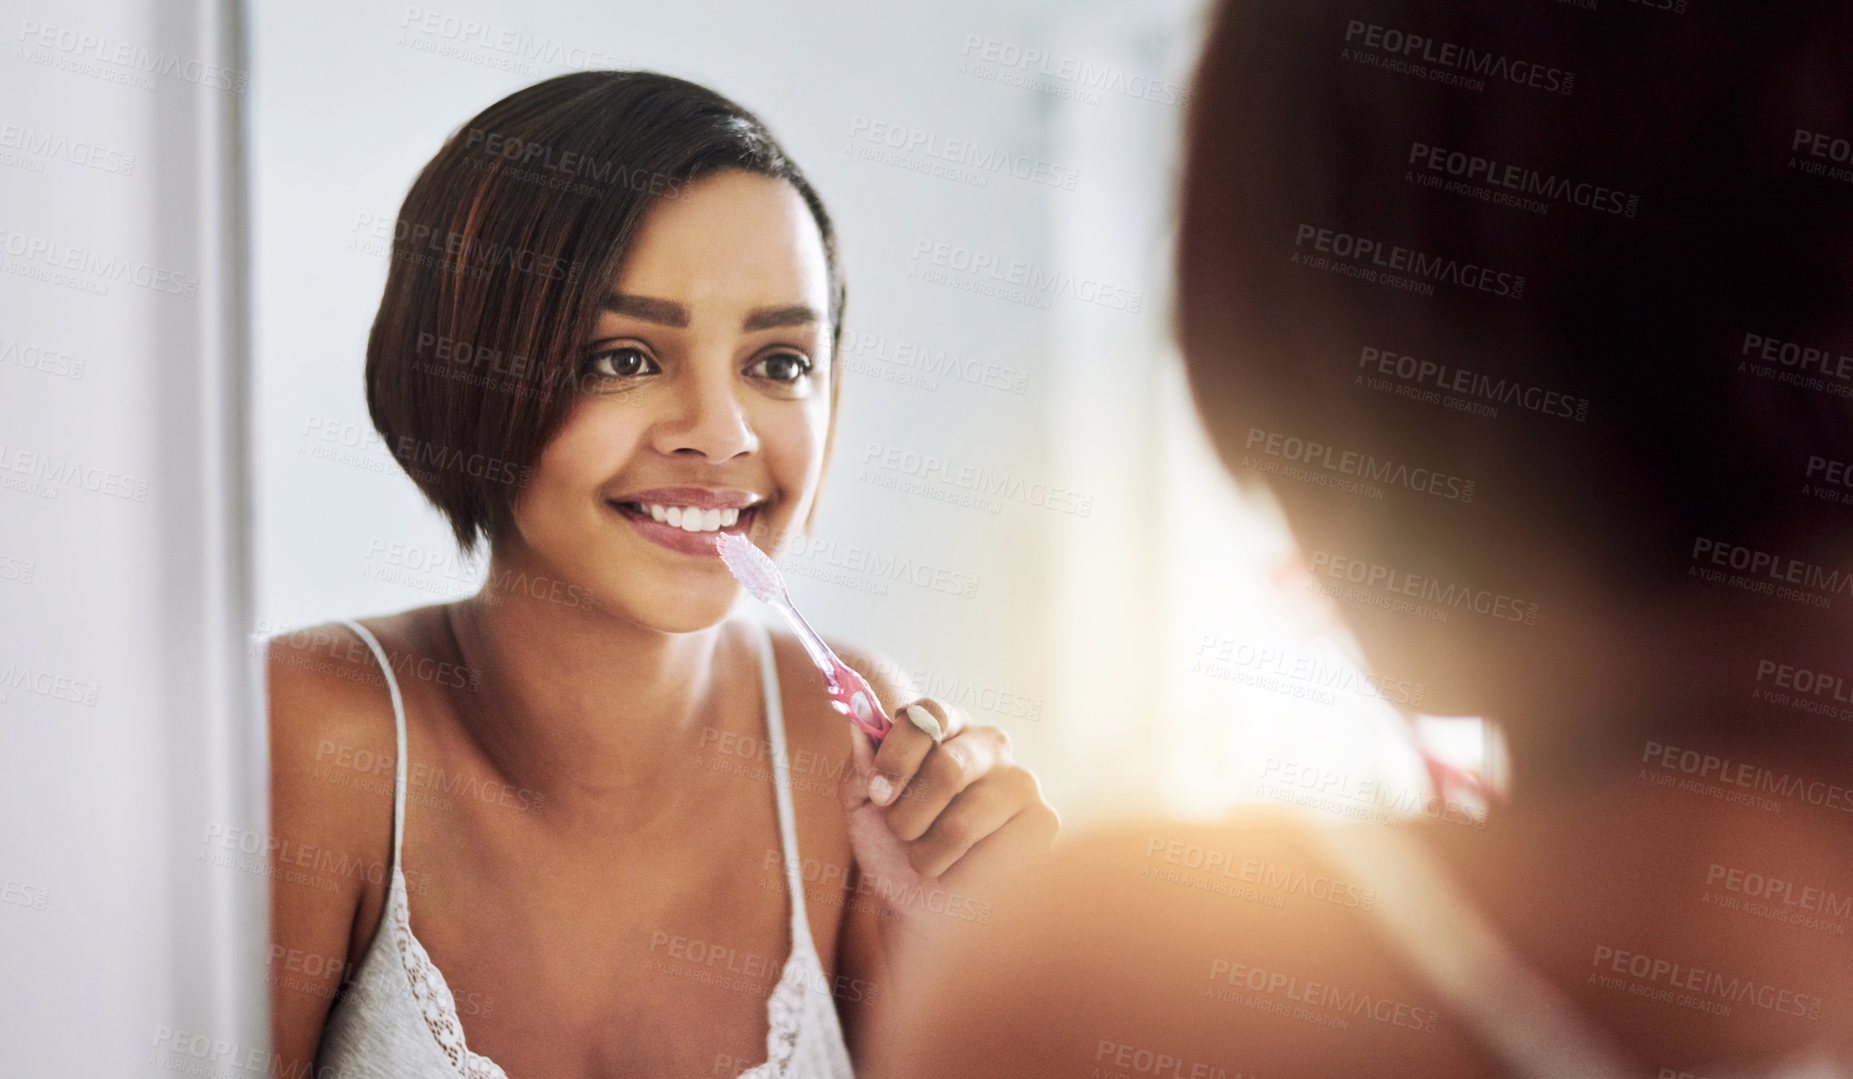 Buy stock photo Shot of an attractive young woman brushing her teeth in the bathroom